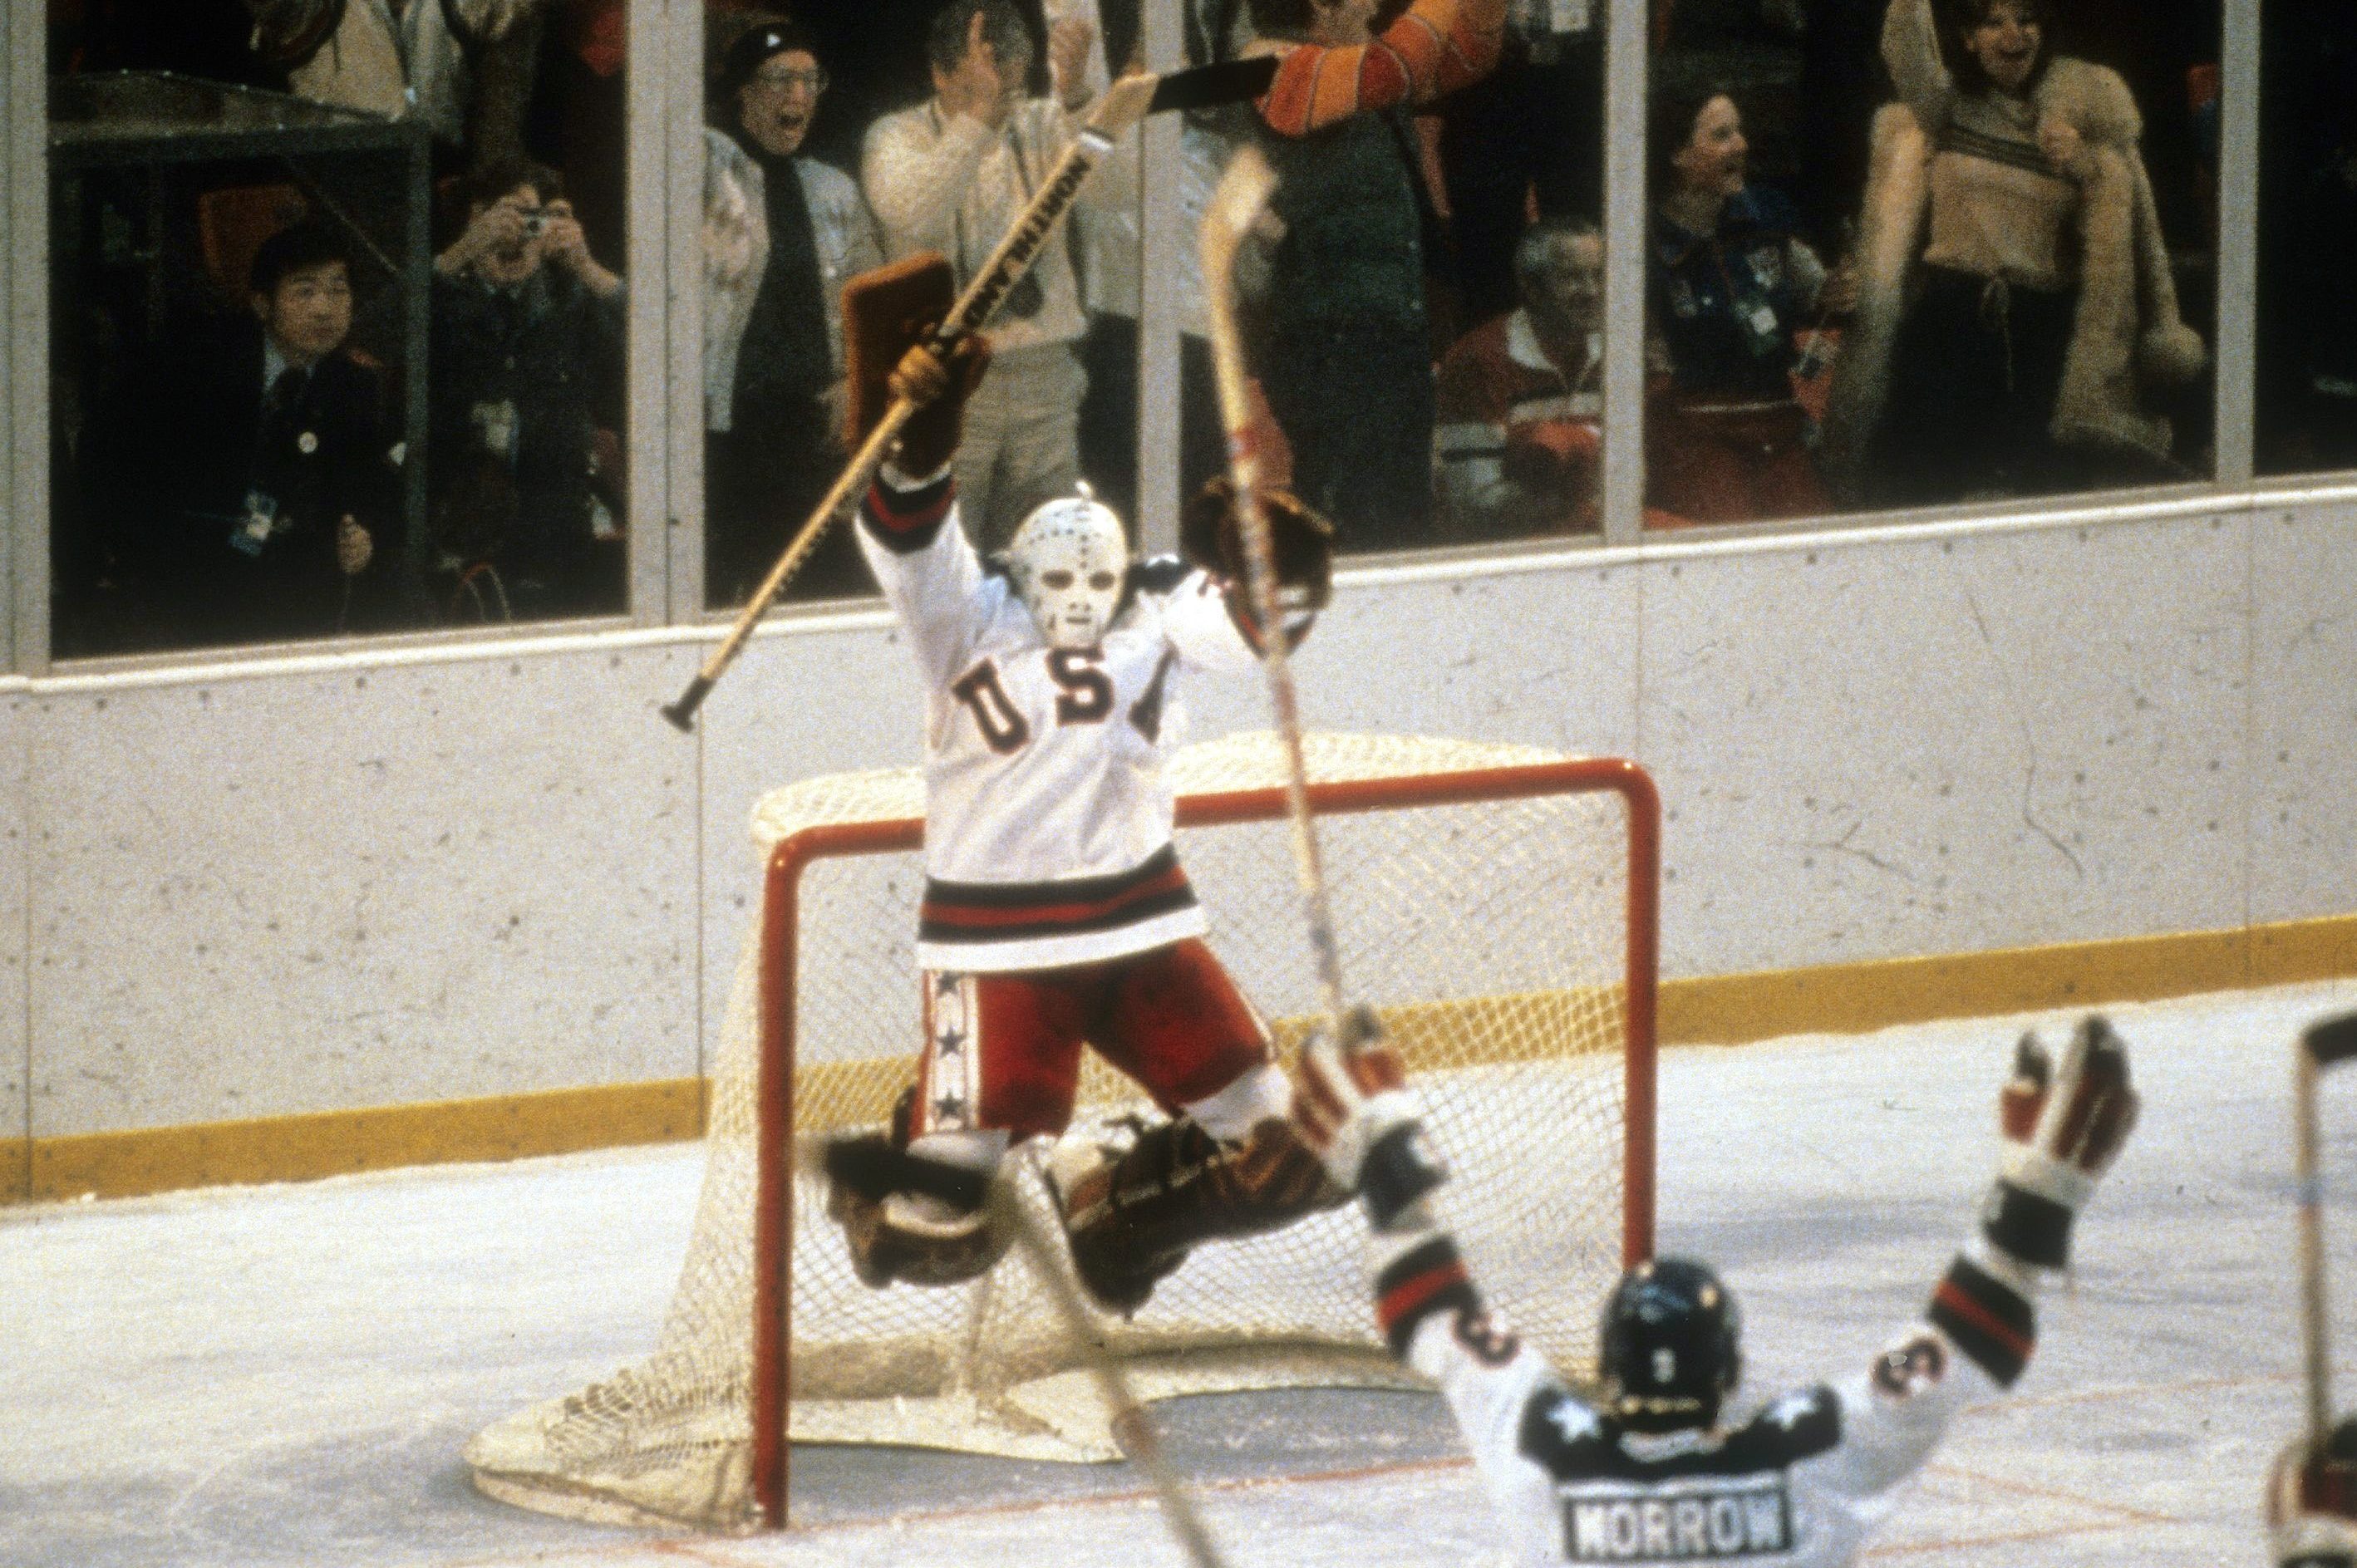 The Miracle on Ice in Lake Placid Remains Untopped 40 Years Later - InsideHook